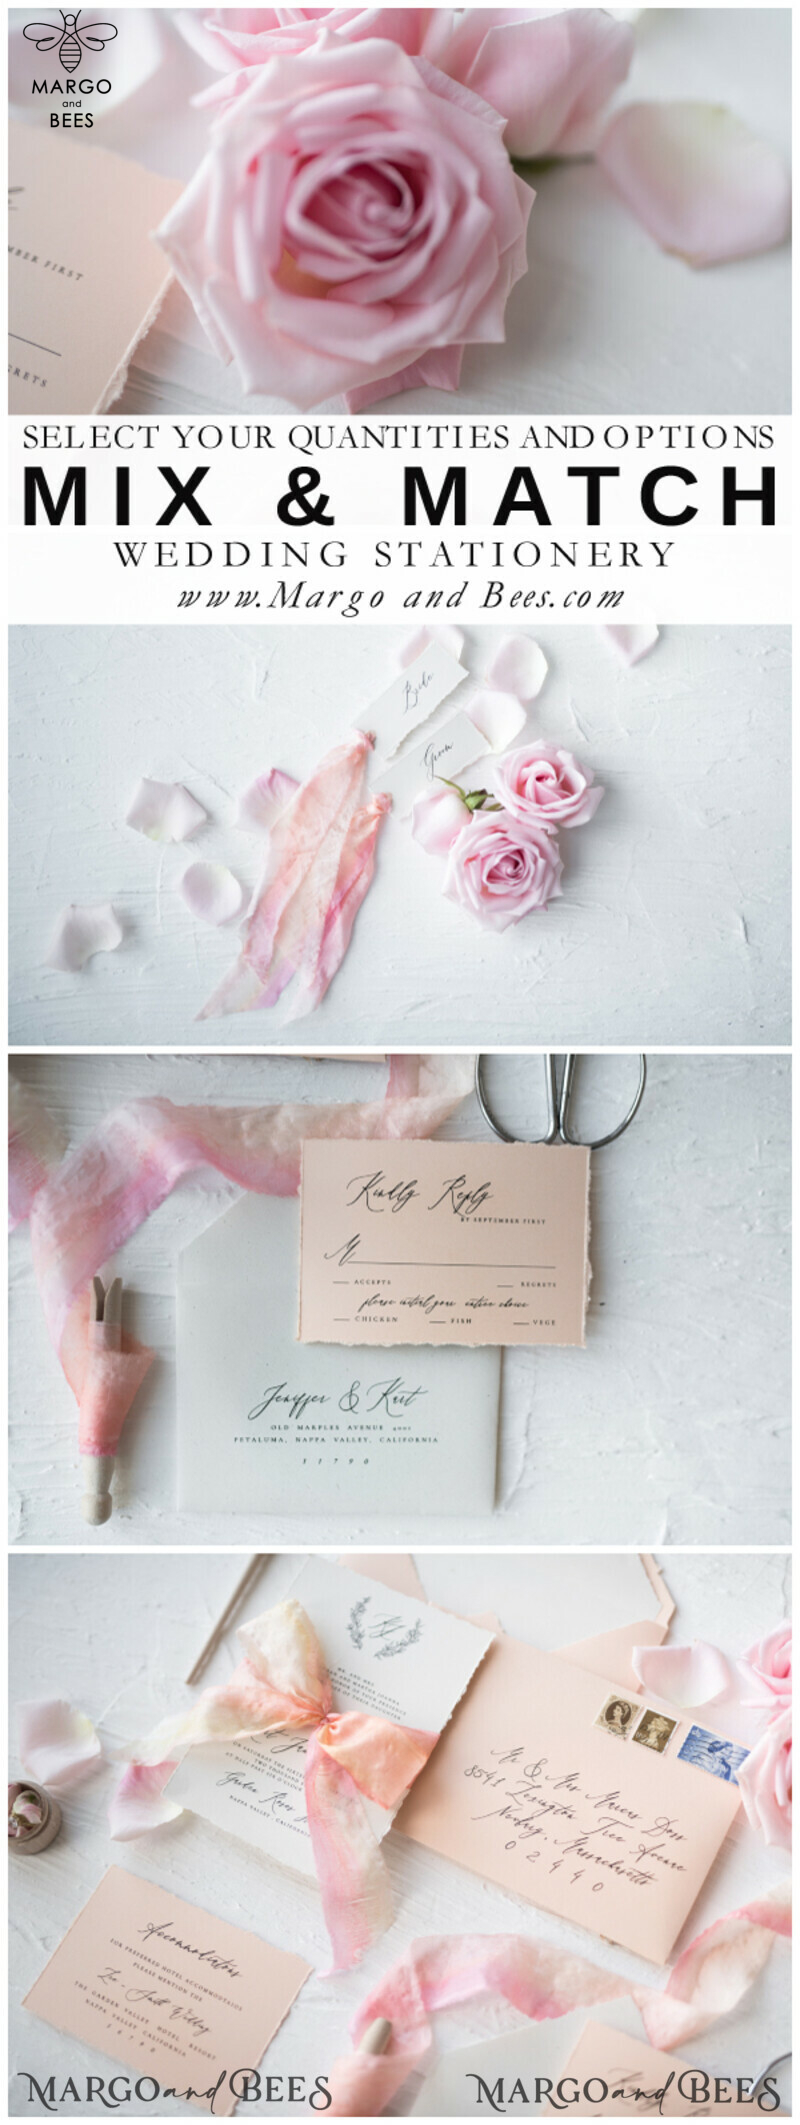 Peach wedding invitations, white wedding invitations, peach and white wedding invitations, minimalistic wedding invitations, minimalist wedding, hand dyed ribbon, hand dyed bow, silk ribbon, silk bow, black lettering, black calligraphy, calligraphy, romantic wedding invitations, wreath, tie dye, romantic wedding invitations, envelope addressing, white card, white wedding stationery, white wedding accessories-11